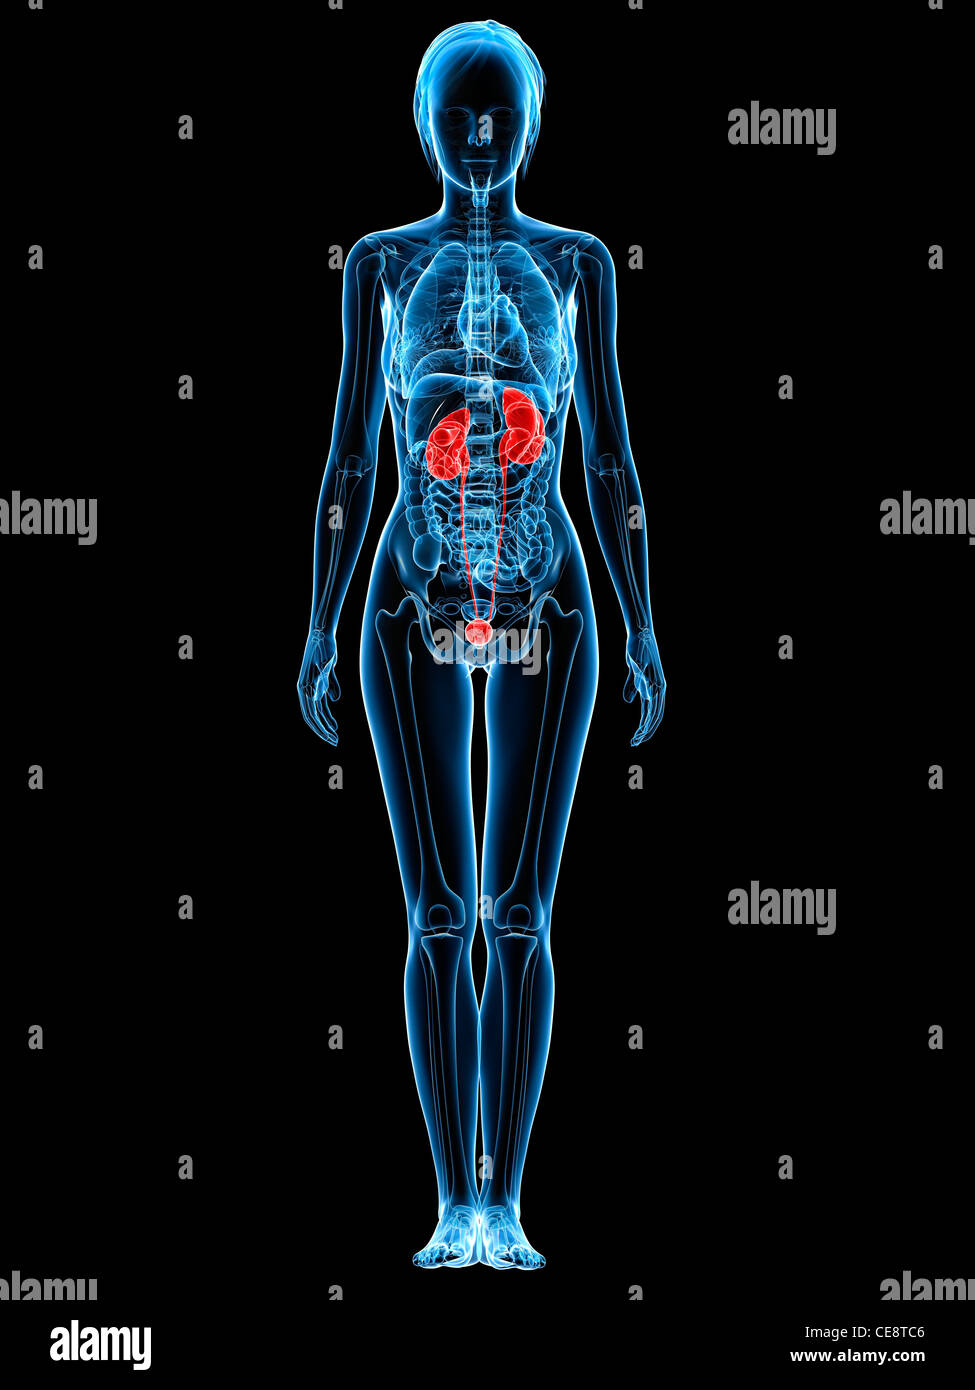 Healthy urinary system, computer artwork. Stock Photo